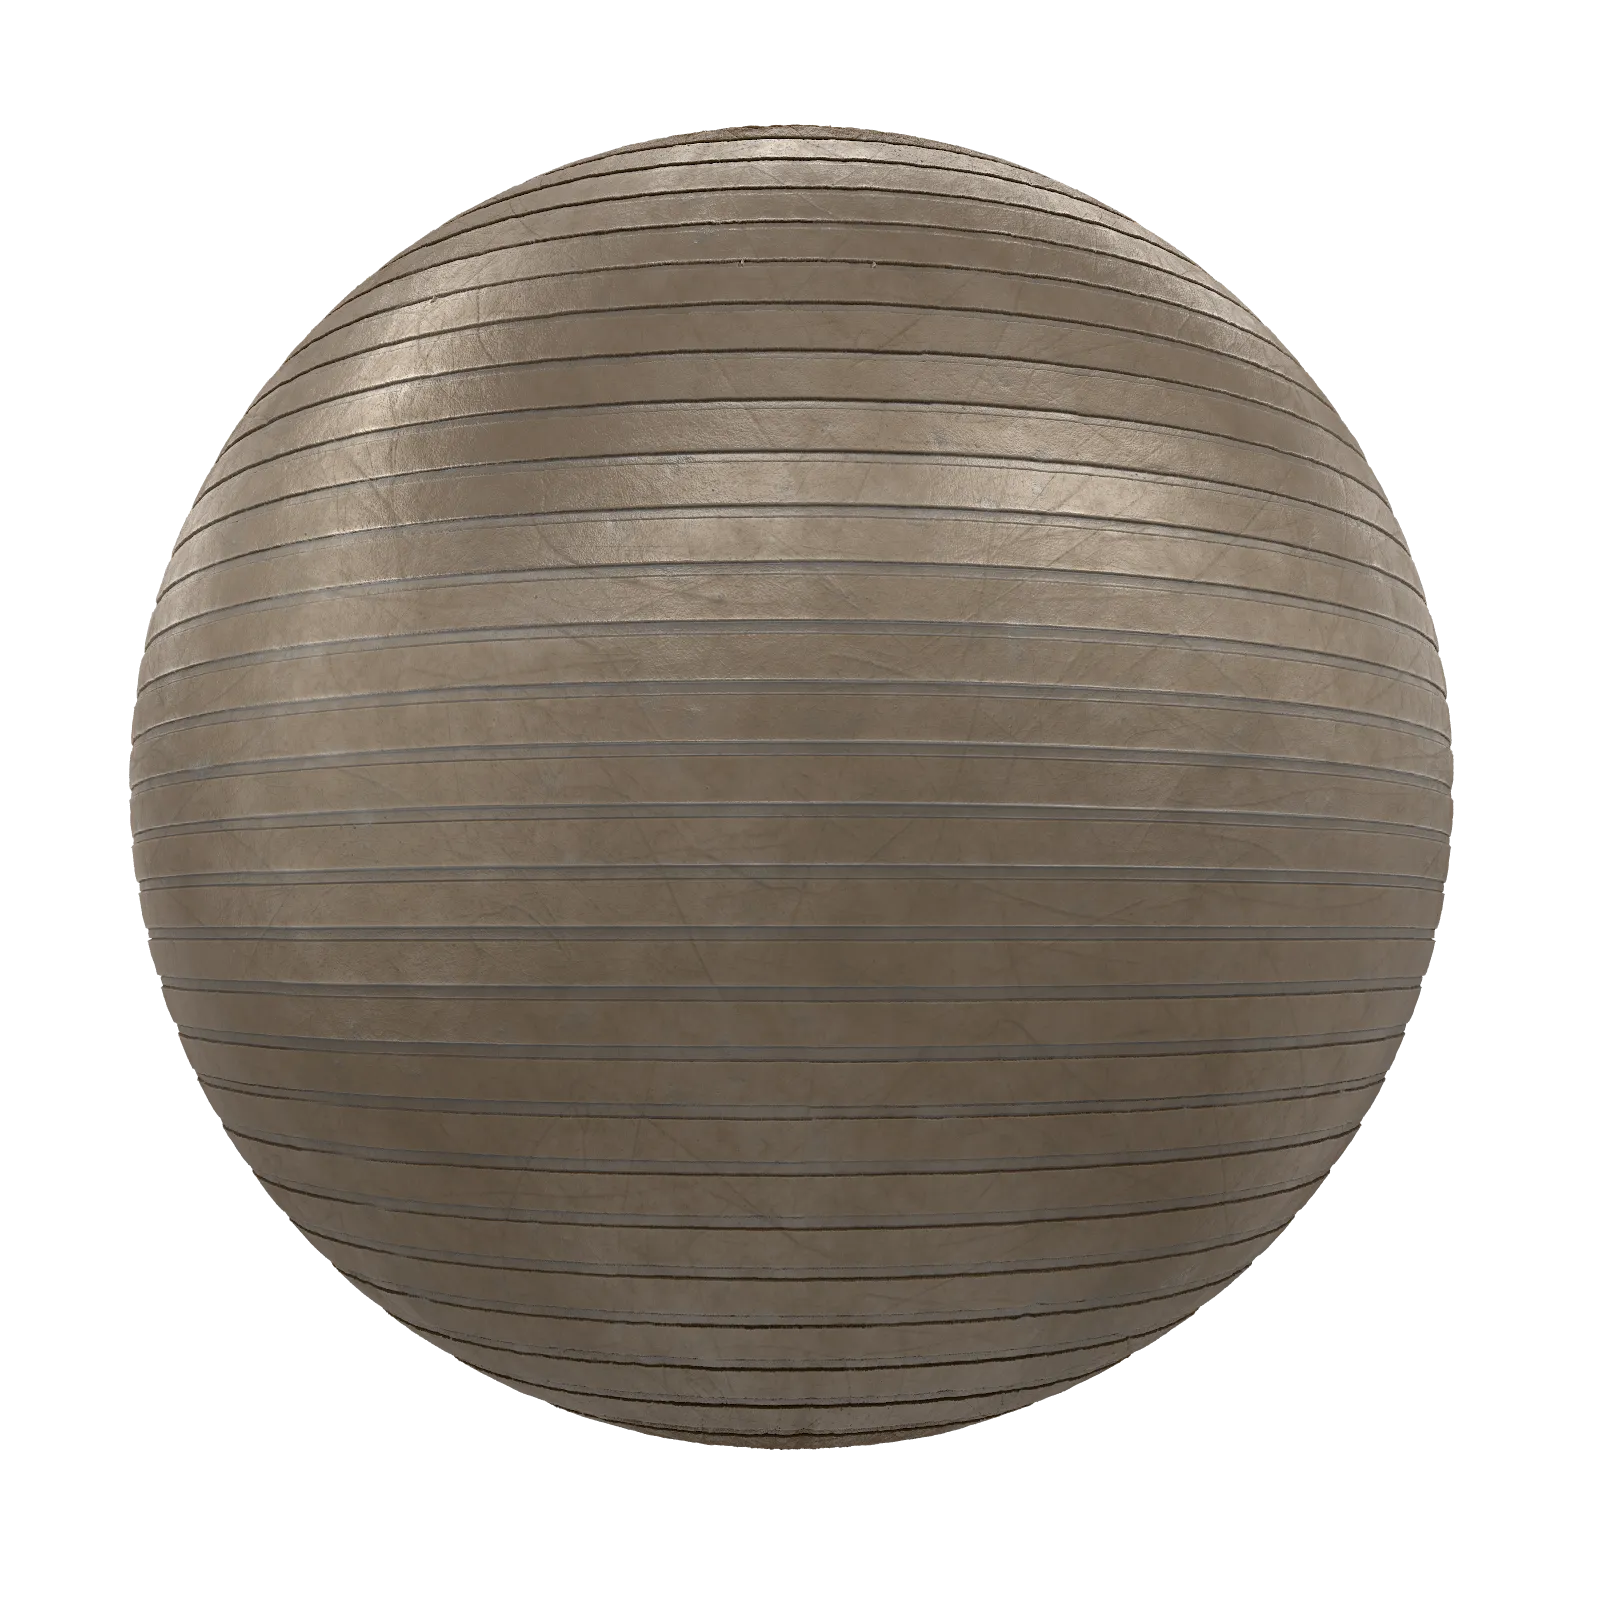 PBR CGAXIS TEXTURES – METALS – Patterned Metal 08